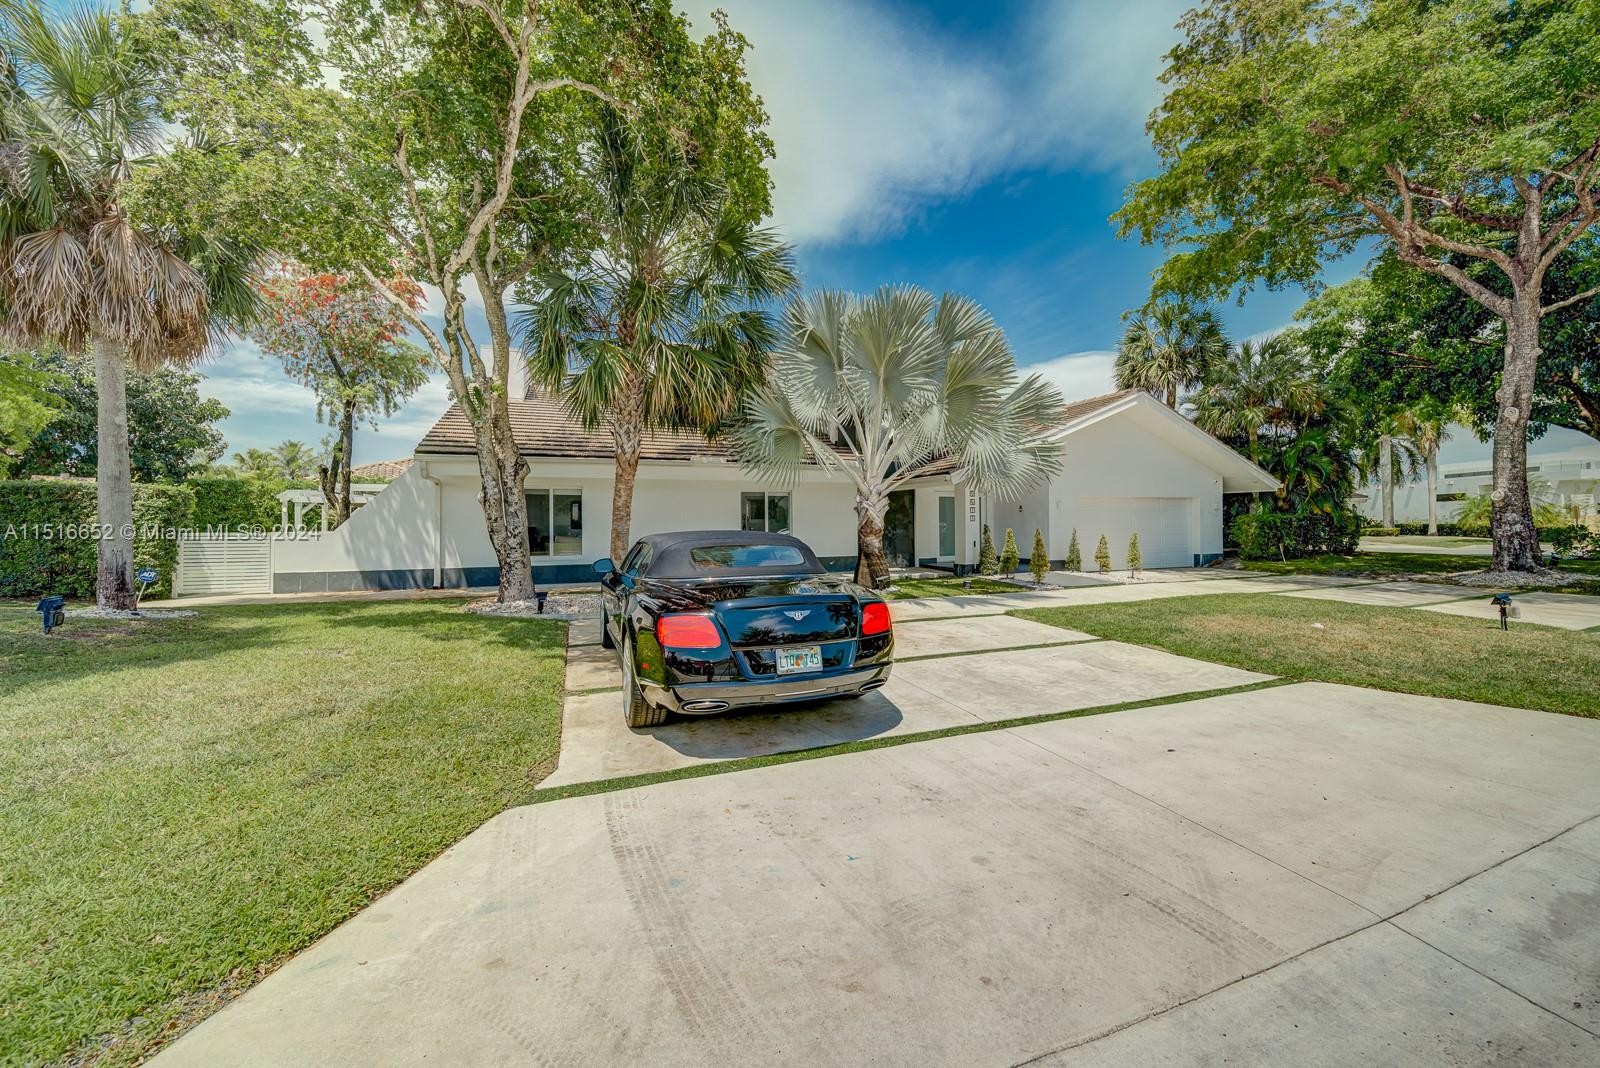 1. 9473 NW 49th Doral Ln